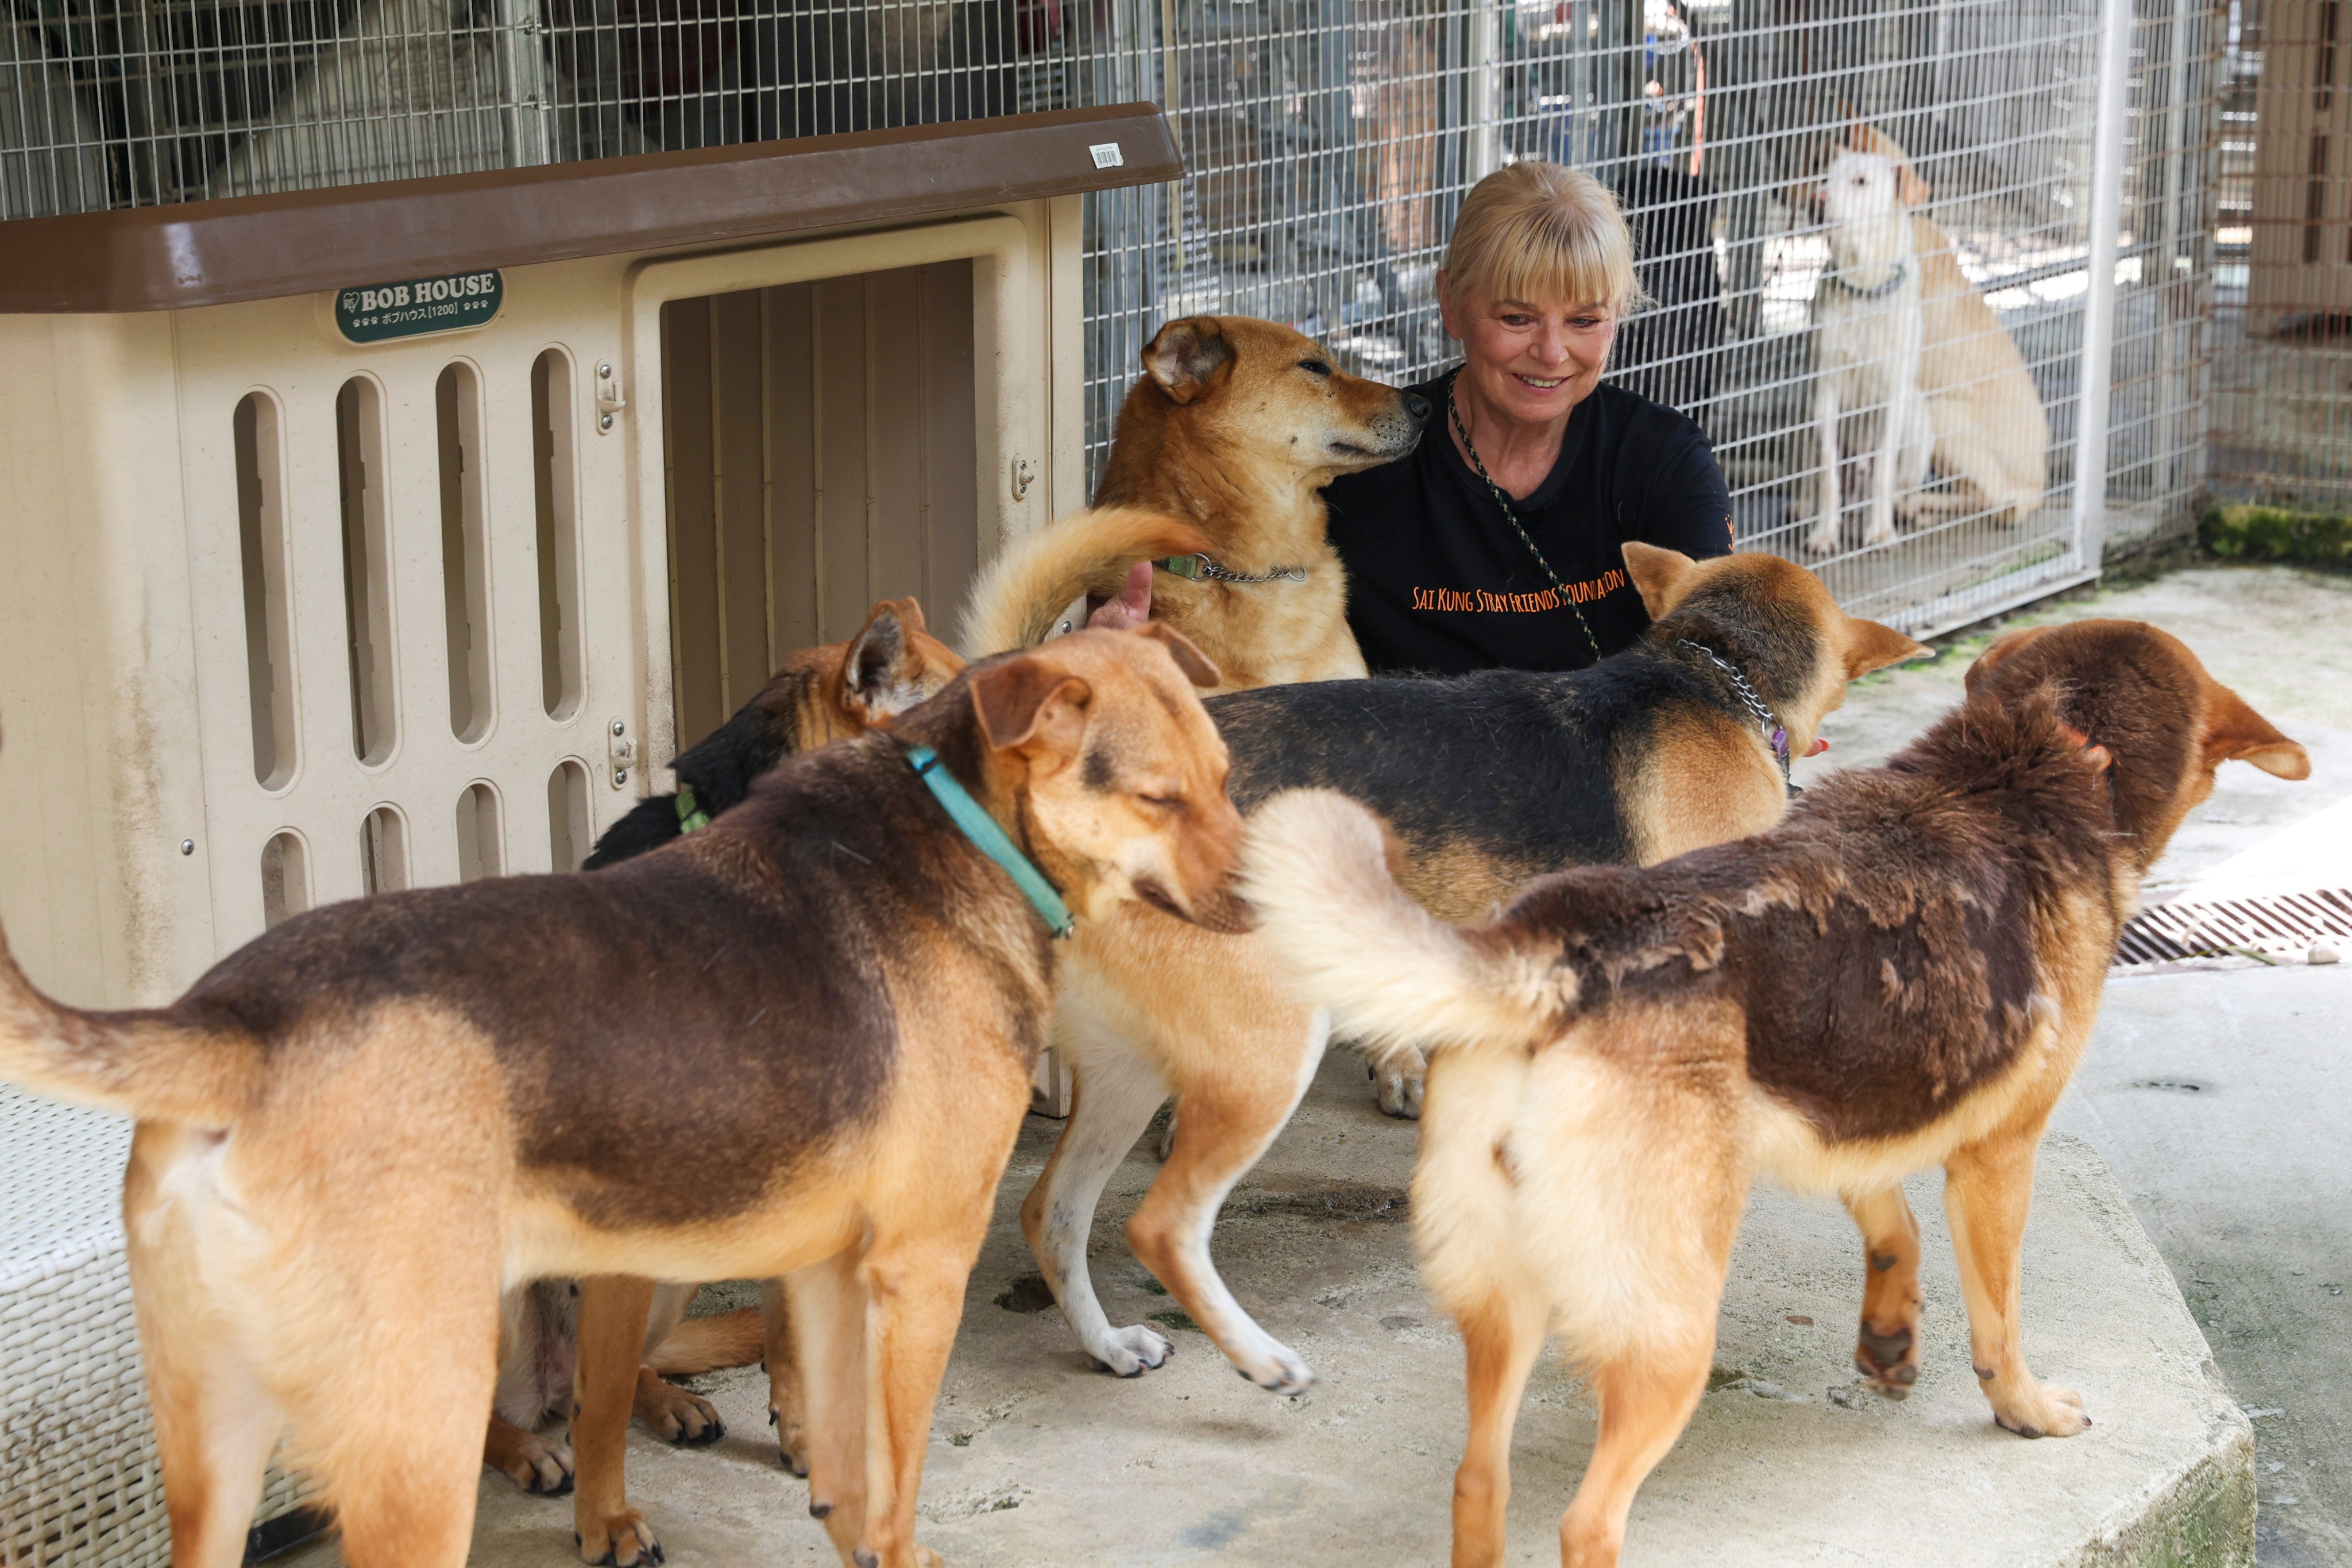 Narelle Pamuk of Sai Kung Stray Friends Foundation, playing with dogs in Sai Kung. The voluntary group rescues abandoned, sick, injured and stray dogs and help dogs find homes. Photo: Edmond So